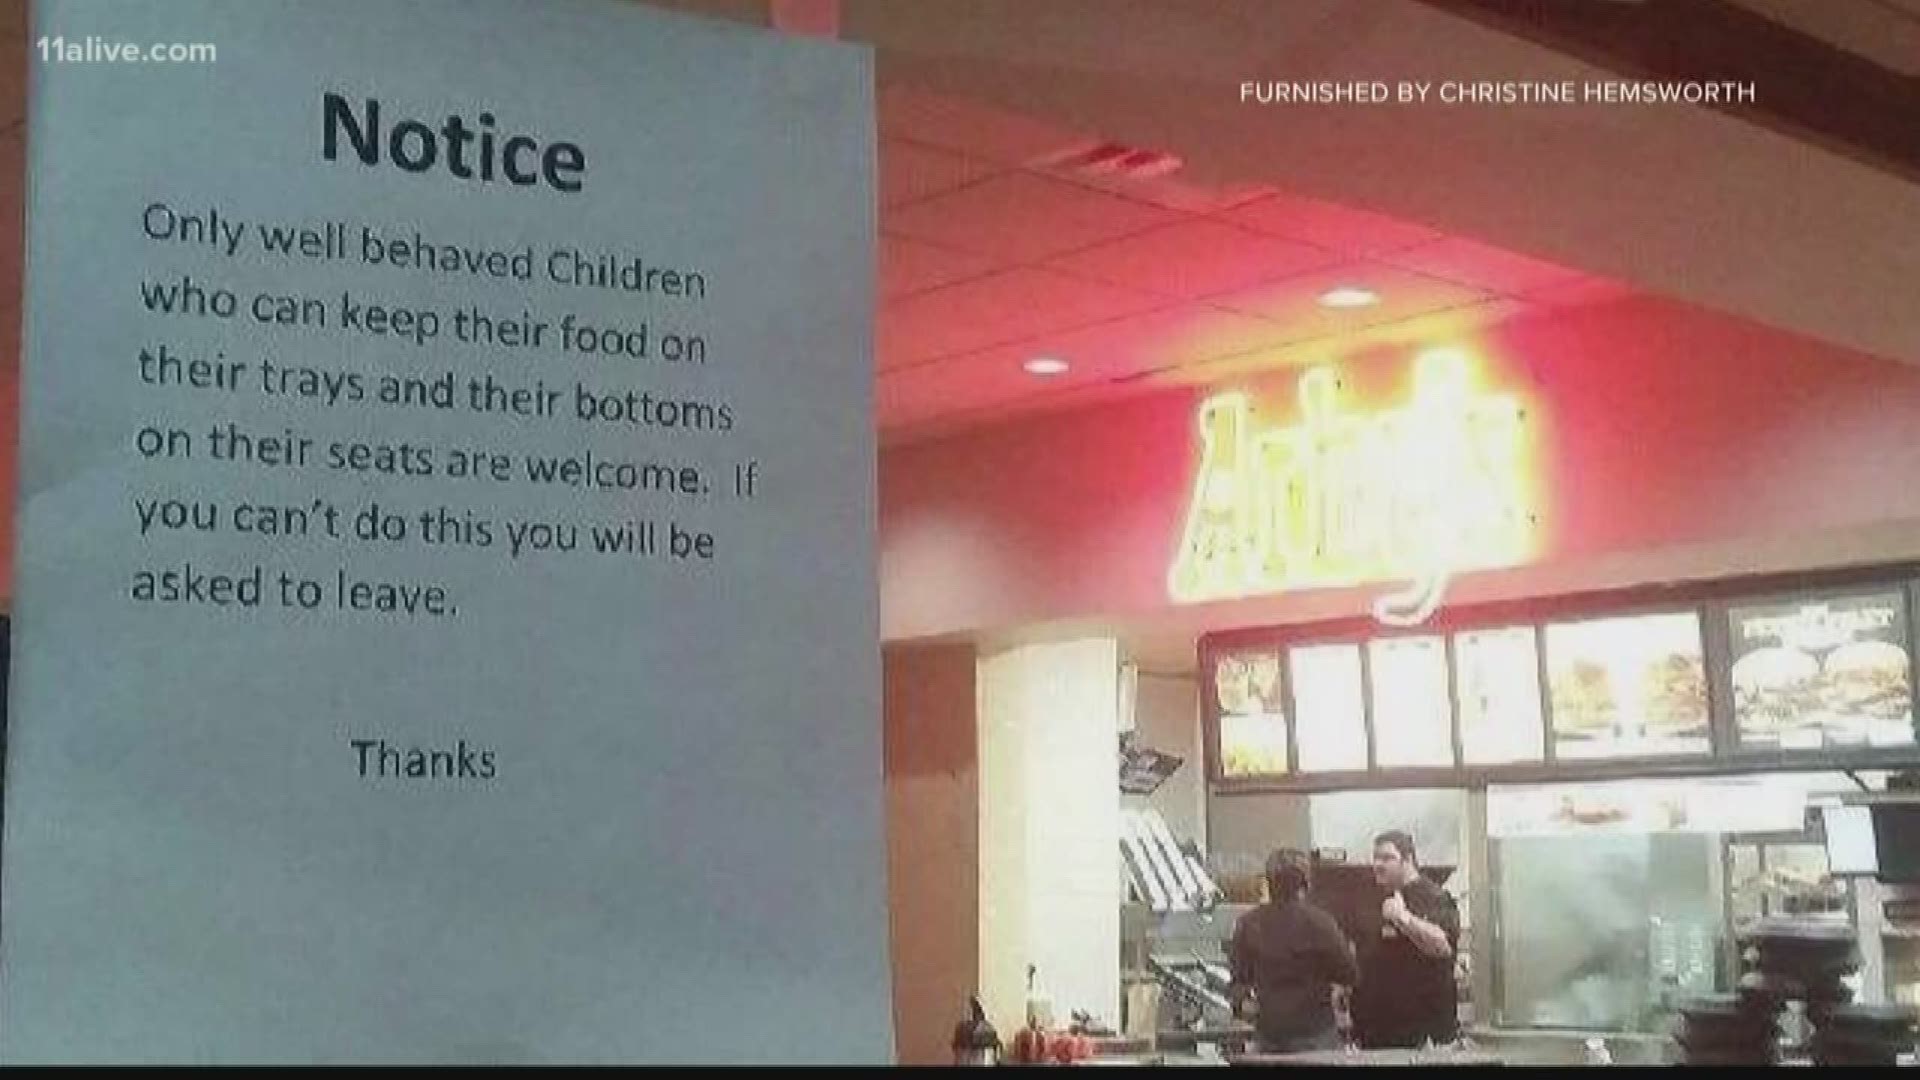 The sign has since been taken down and Arby's says they have disciplined the manager and the team at the Elk River location.